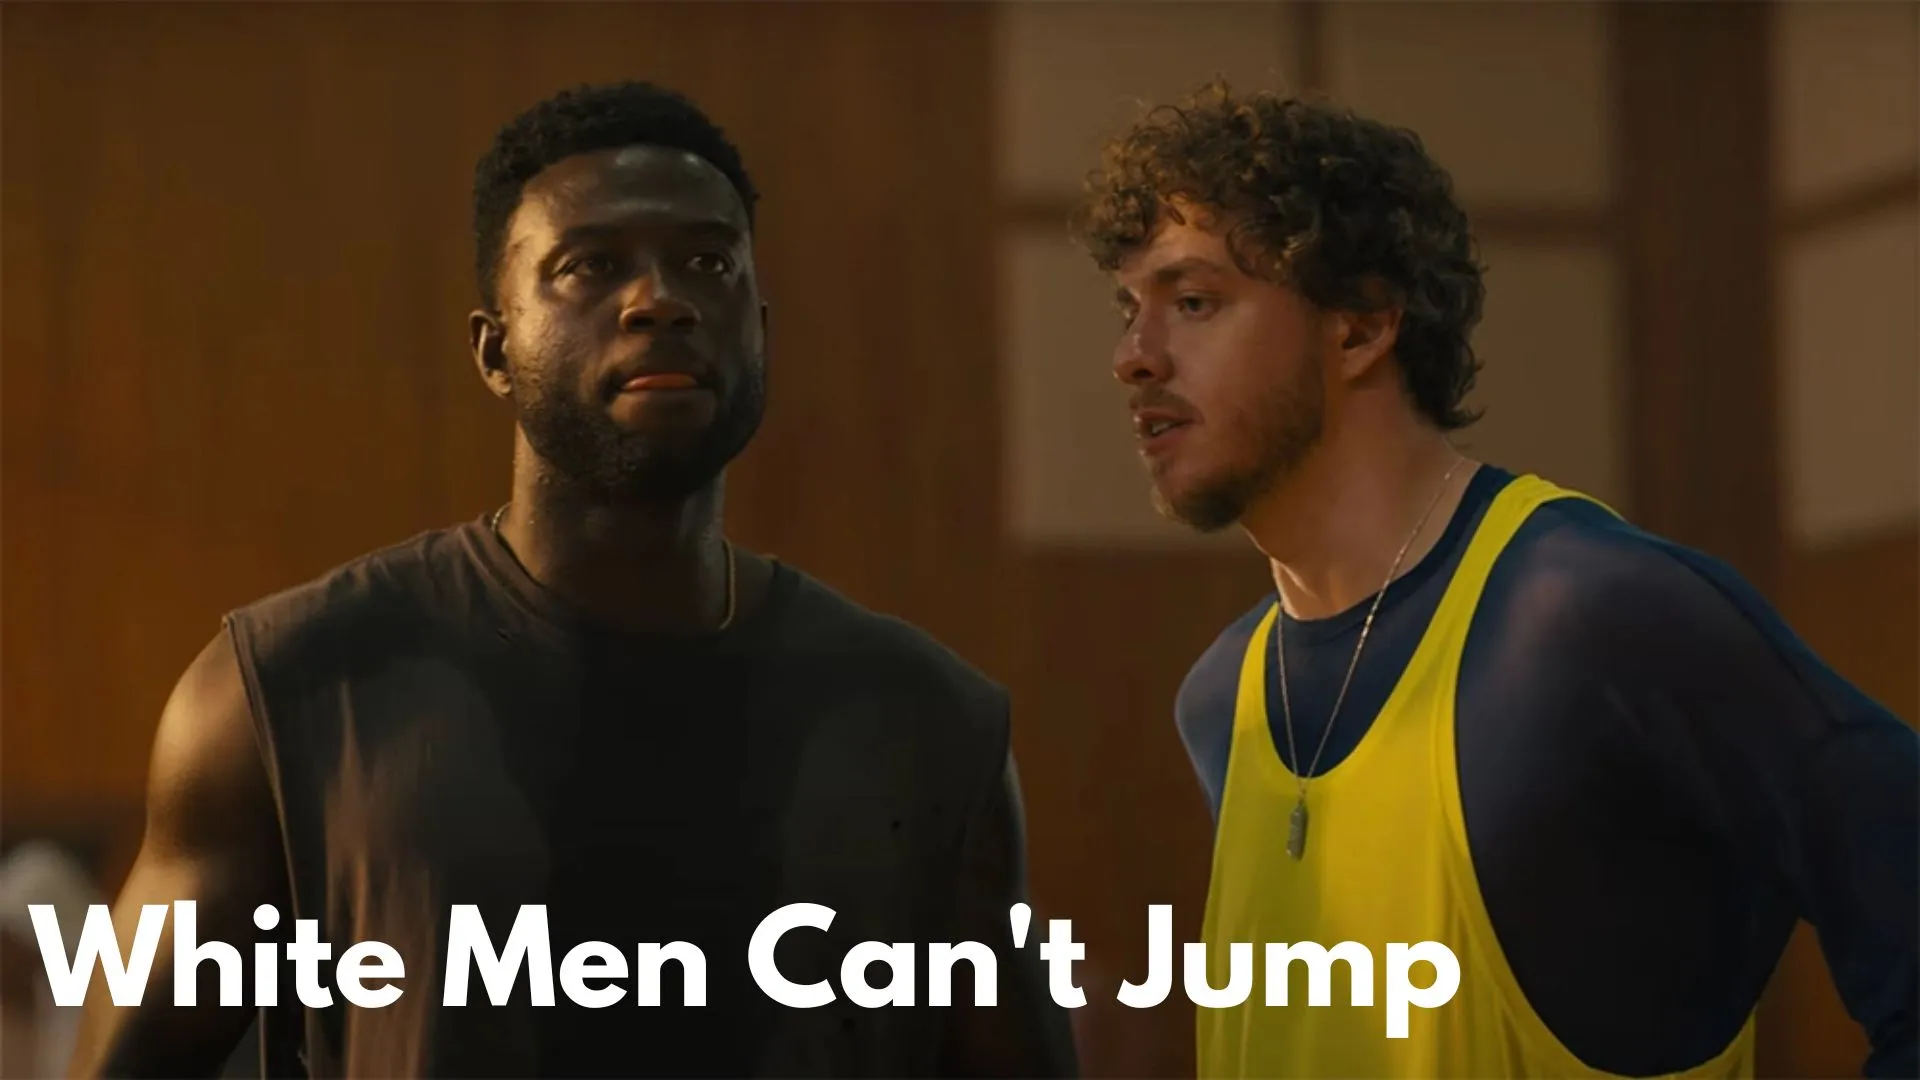 White Men Can't Jump Parents Guide